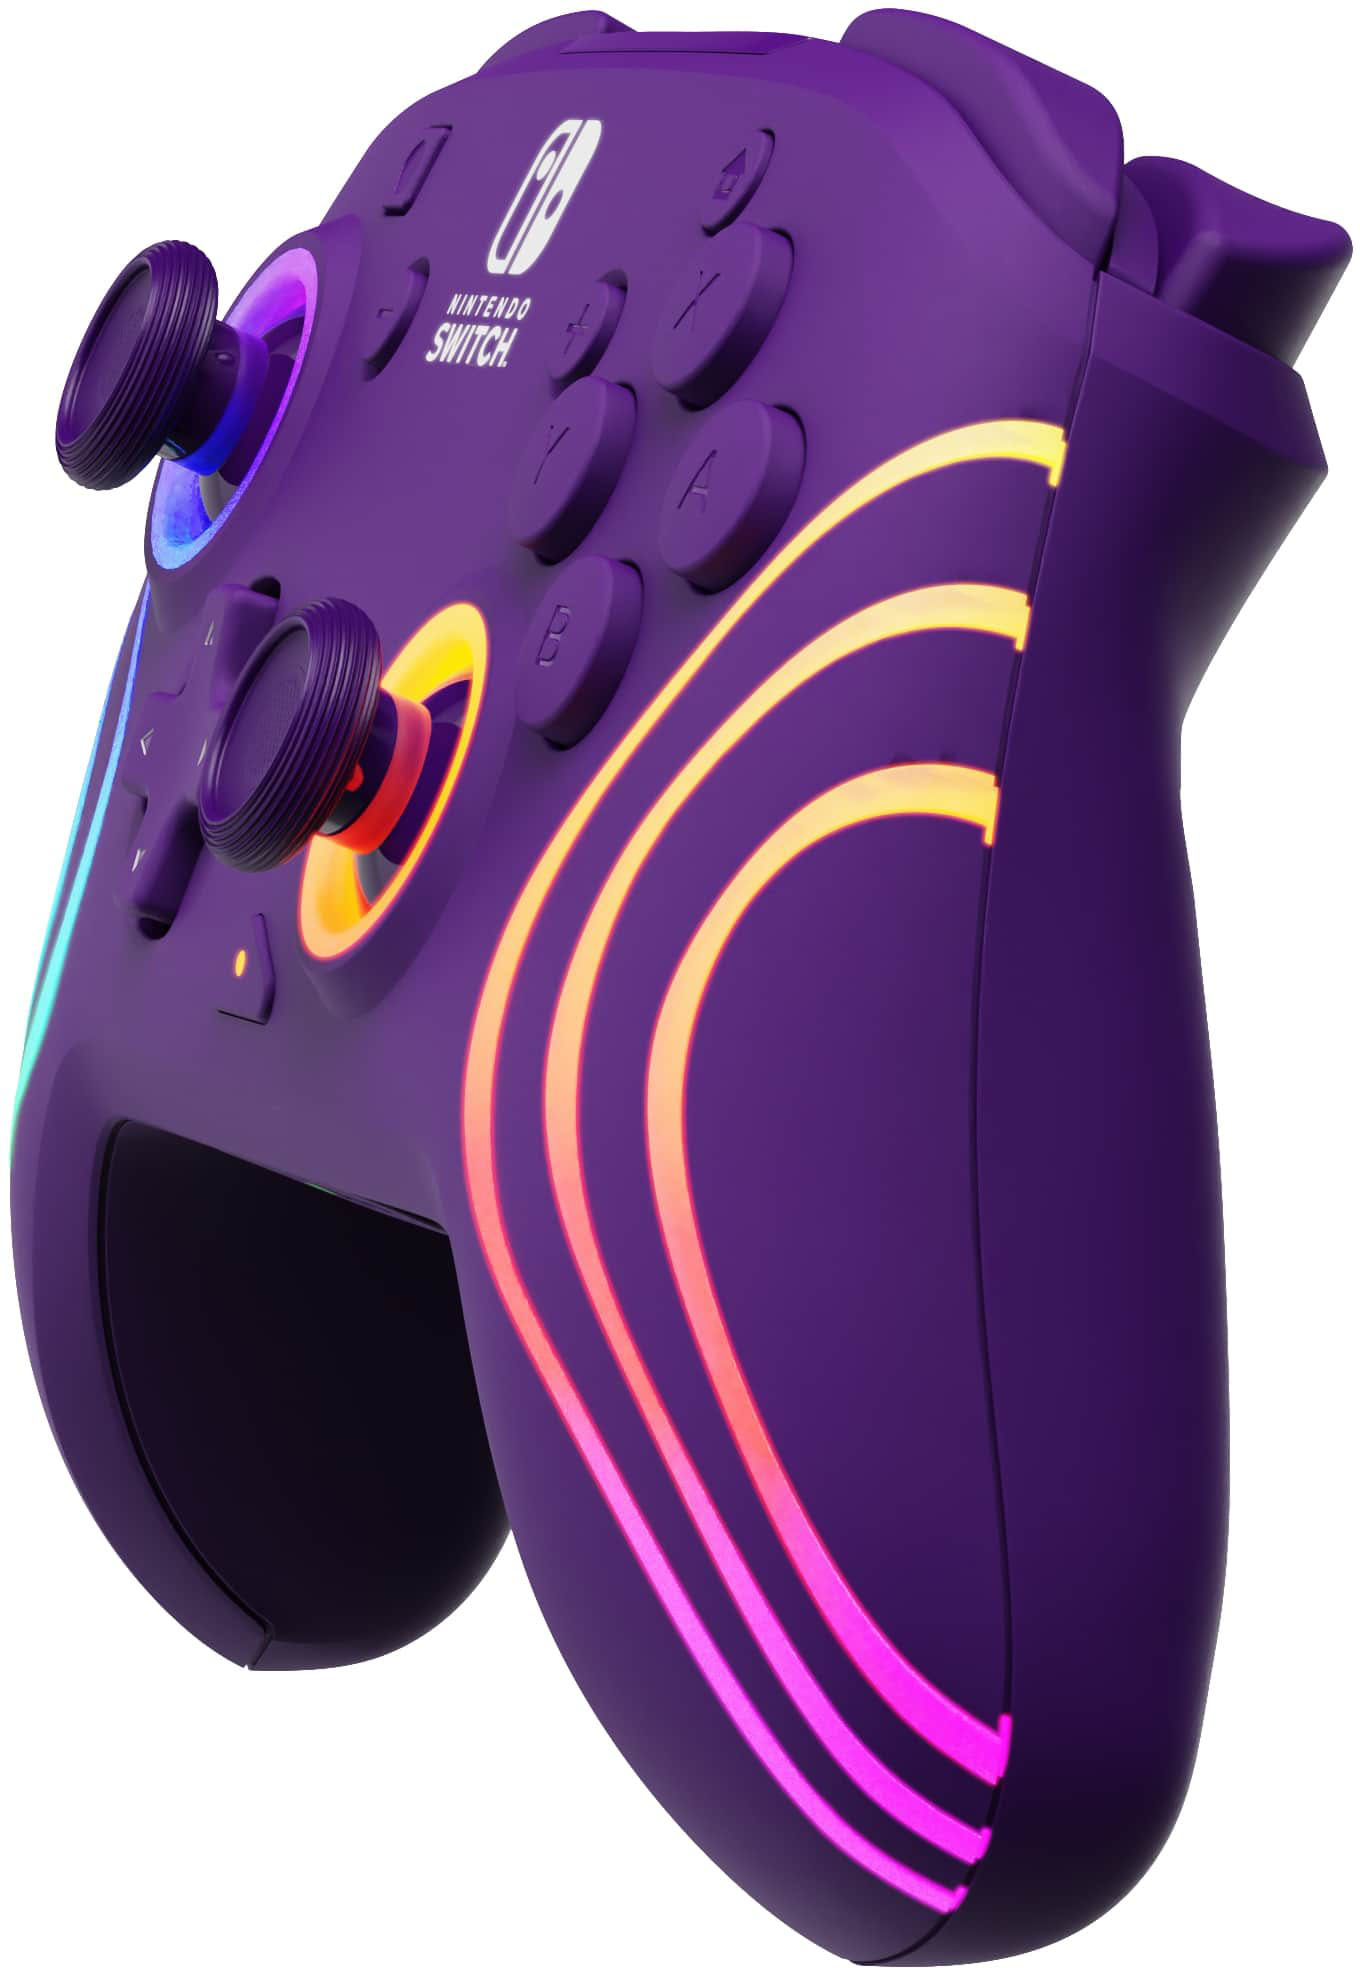 PDP Afterglow Wave Wireless Controller For Nintendo Switch, Nintendo ...